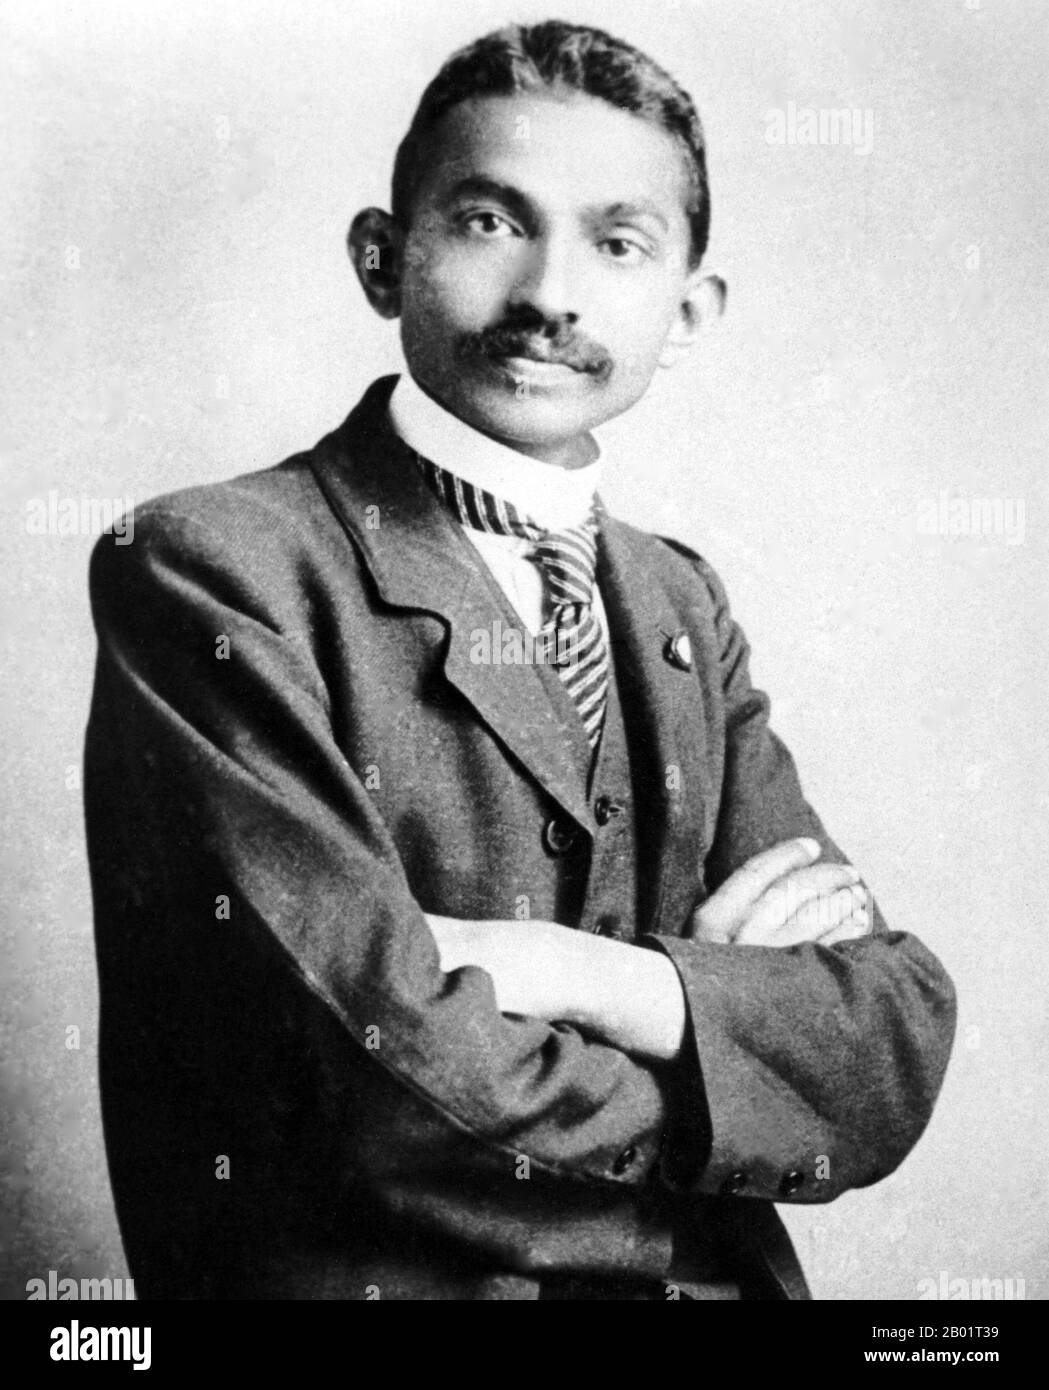 India/South Africa: Mahatma Gandhi (2 October 1869 - 30 January 1948), preeminent political and ideological leader of India's independence movement, as a young lawyer in South Africa, 1906.  Mohandas Karamchand Gandhi was the preeminent political and ideological leader of India during the Indian independence movement. He pioneered satyagraha. This is defined as resistance to tyranny through mass civil disobedience, a philosophy firmly founded upon ahimsa, or total non-violence. This concept helped India gain independence and inspired movements for civil rights and freedom across the world. Stock Photo